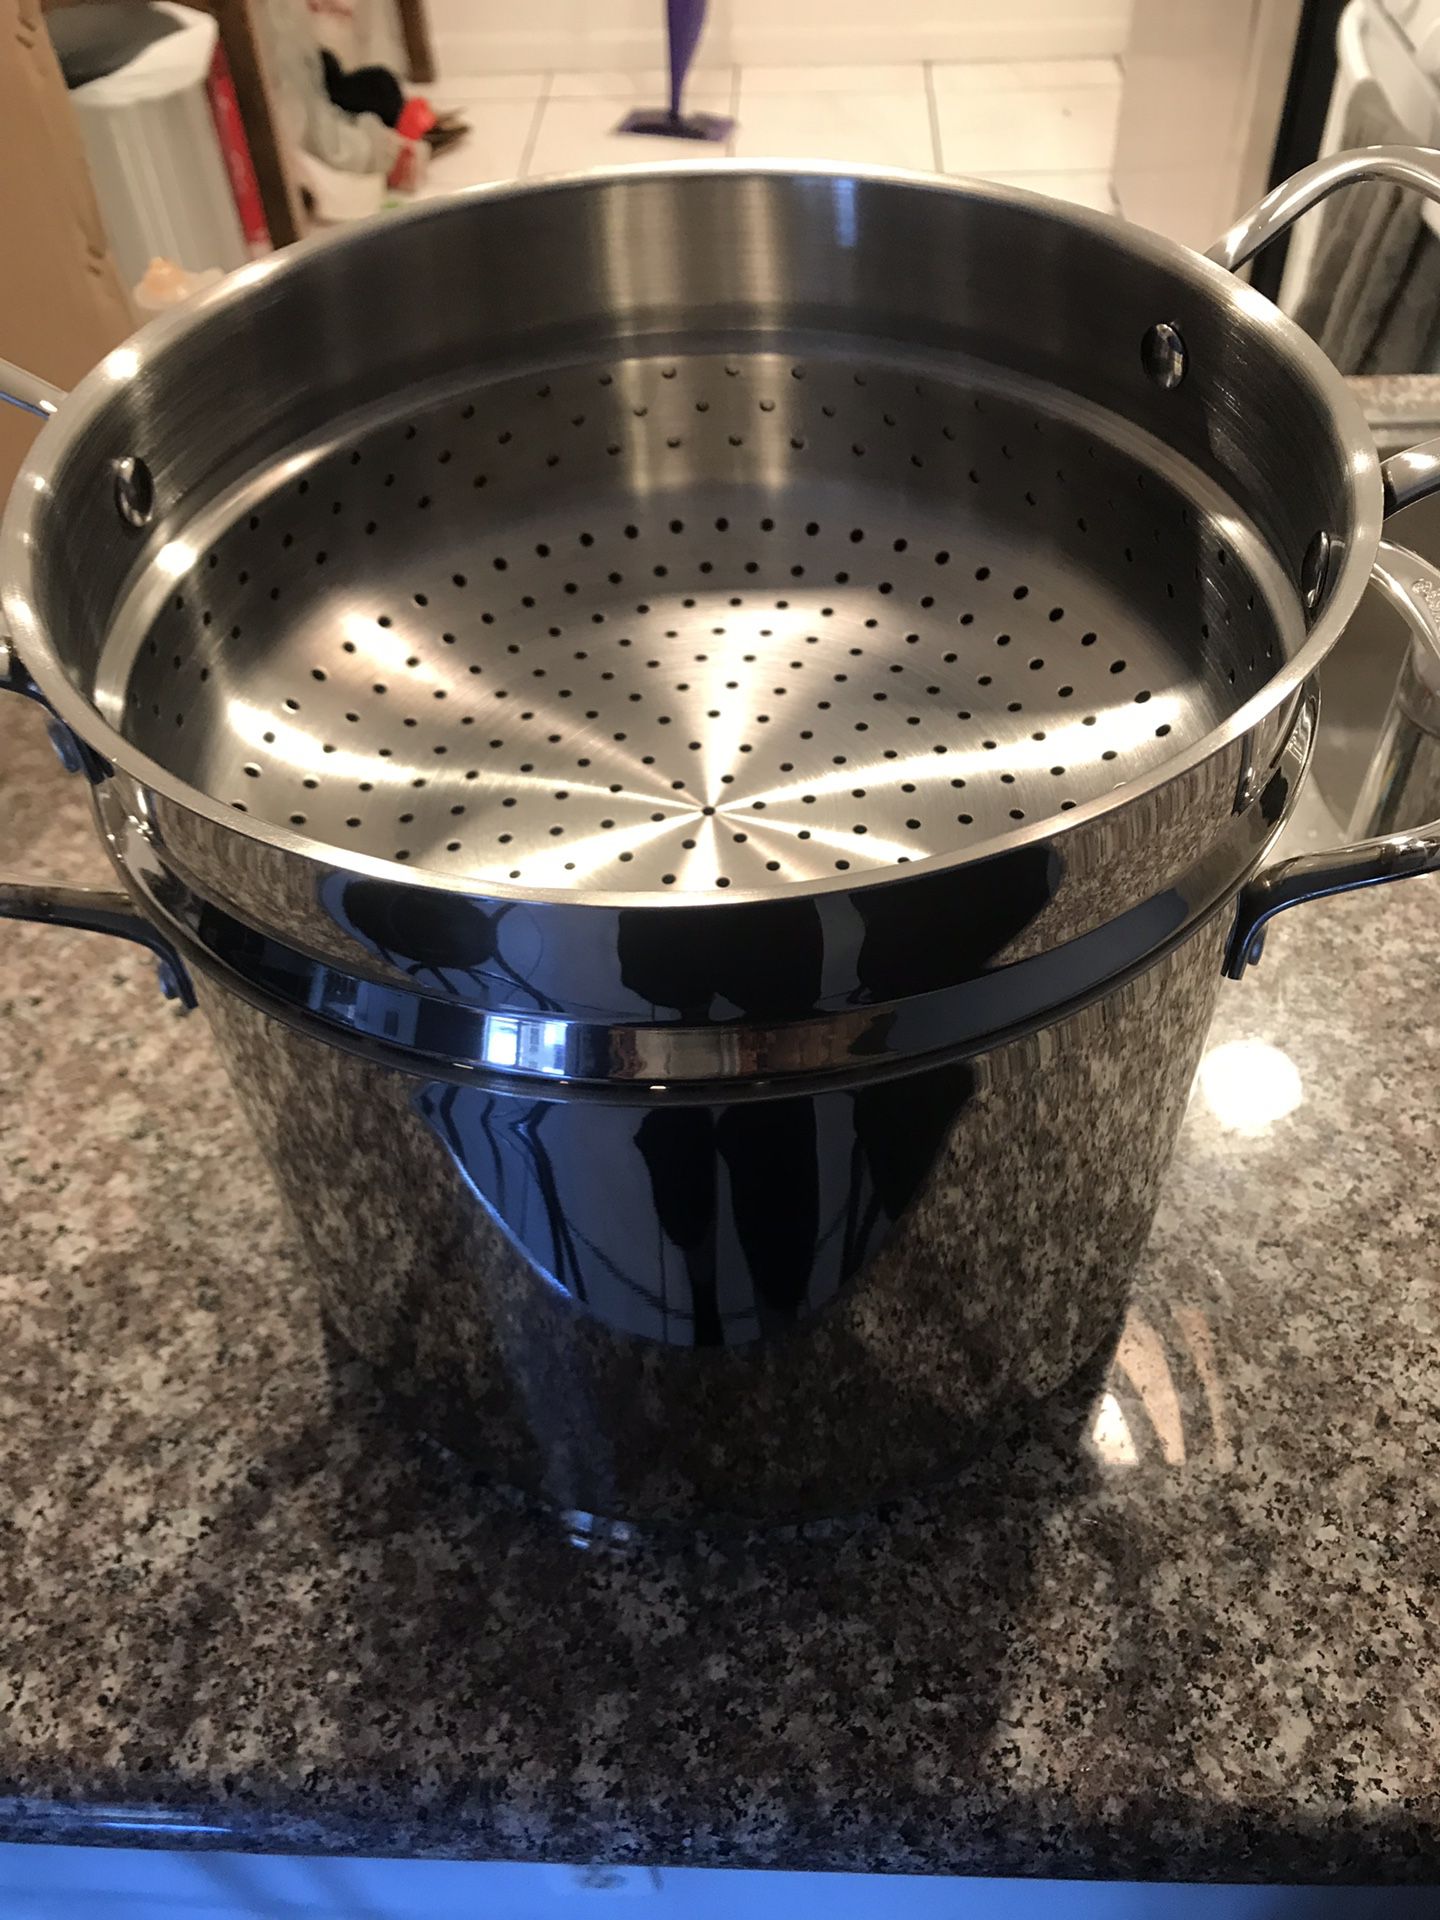 Princess house 8 qt stock pot with steamer